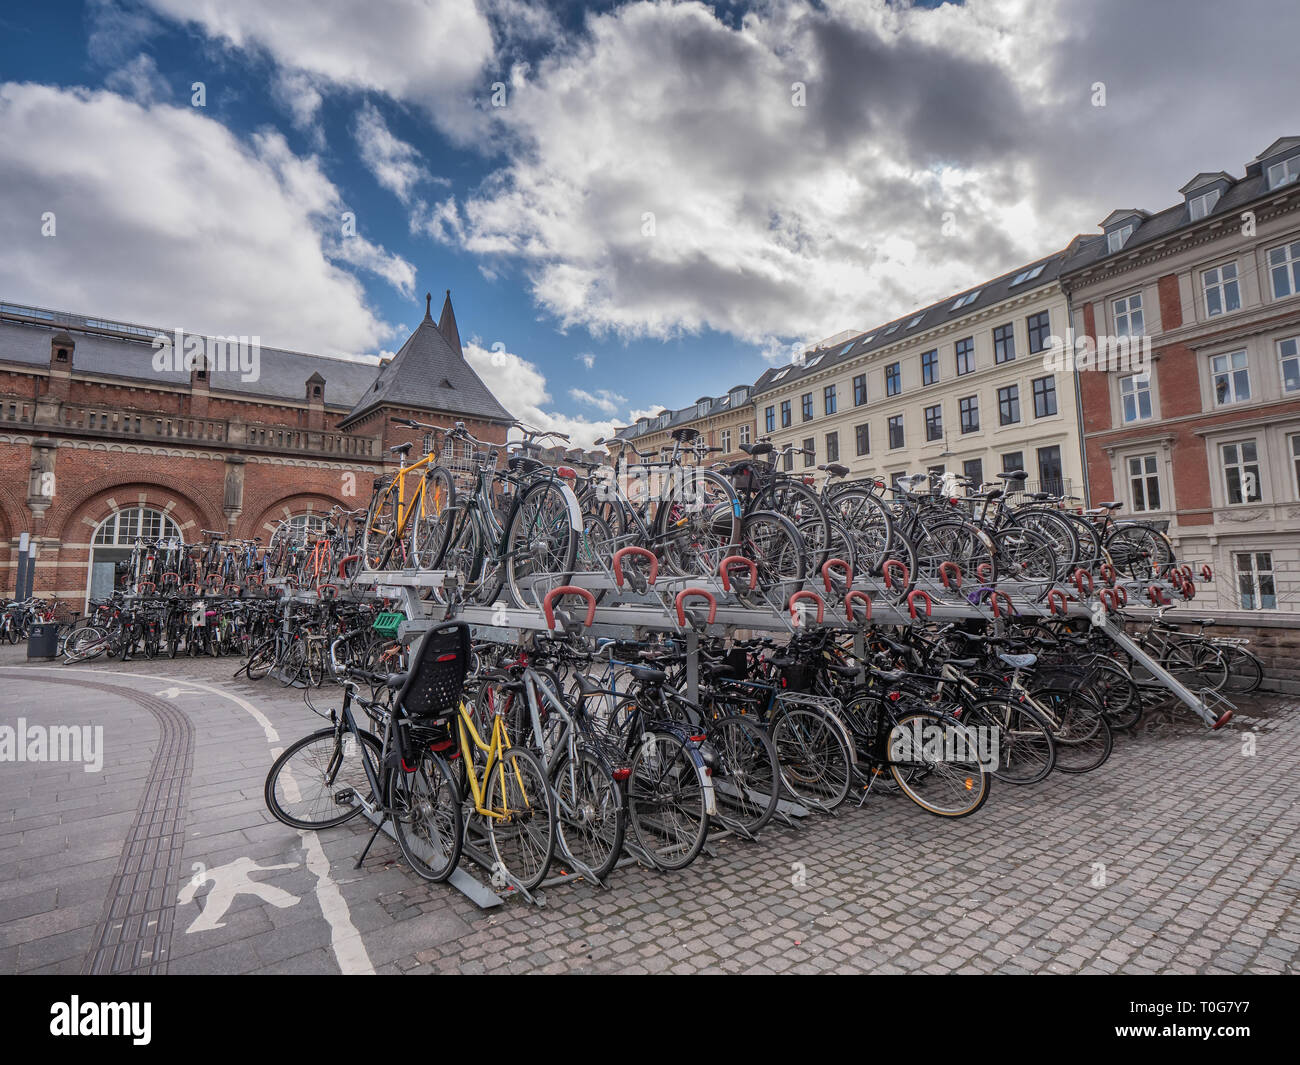 Bicycle parking in two decks at Copenhagen main rail staion, Denmark Stock Photo